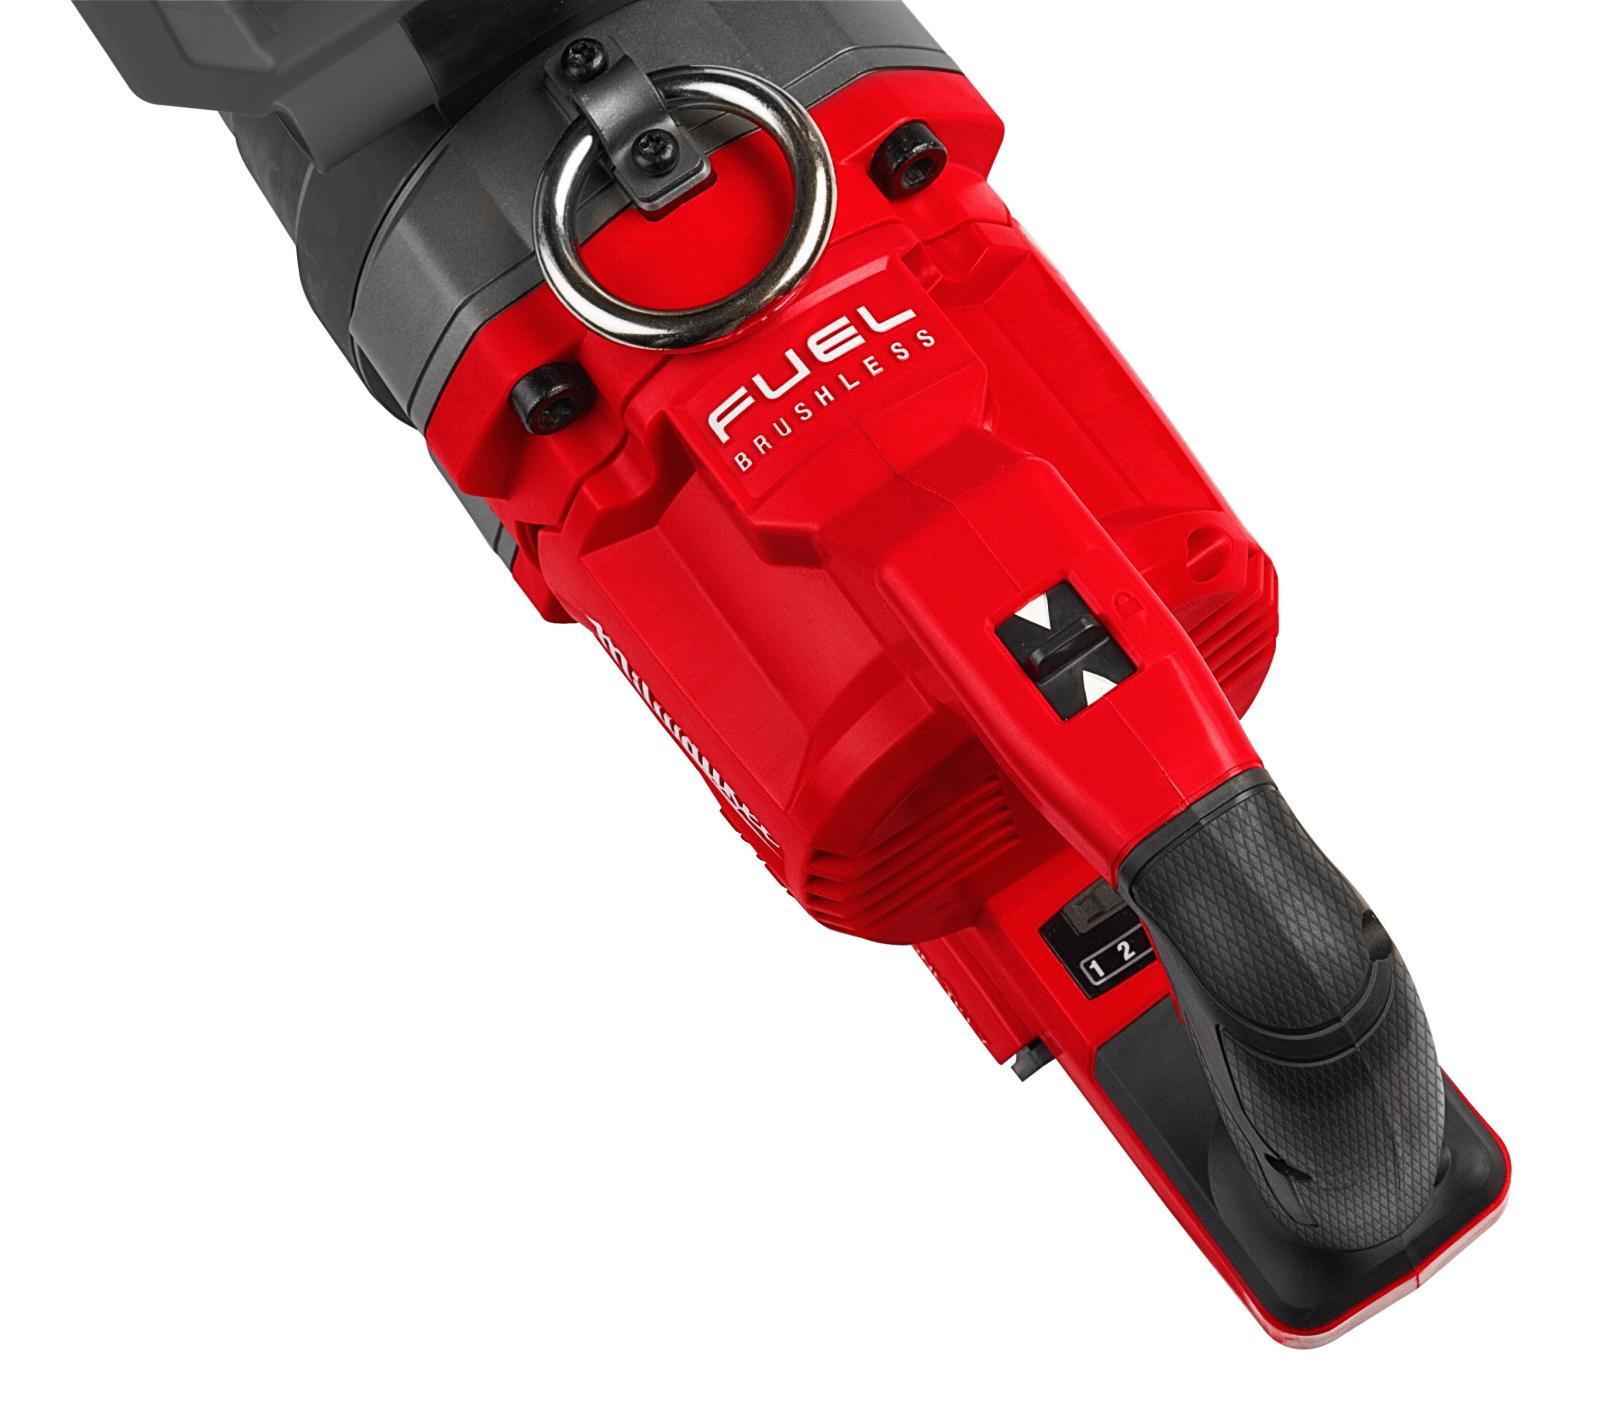 Milwaukee M18 Fuel 1" D-Handle High Torque Impact Wrench With ONE-KEY